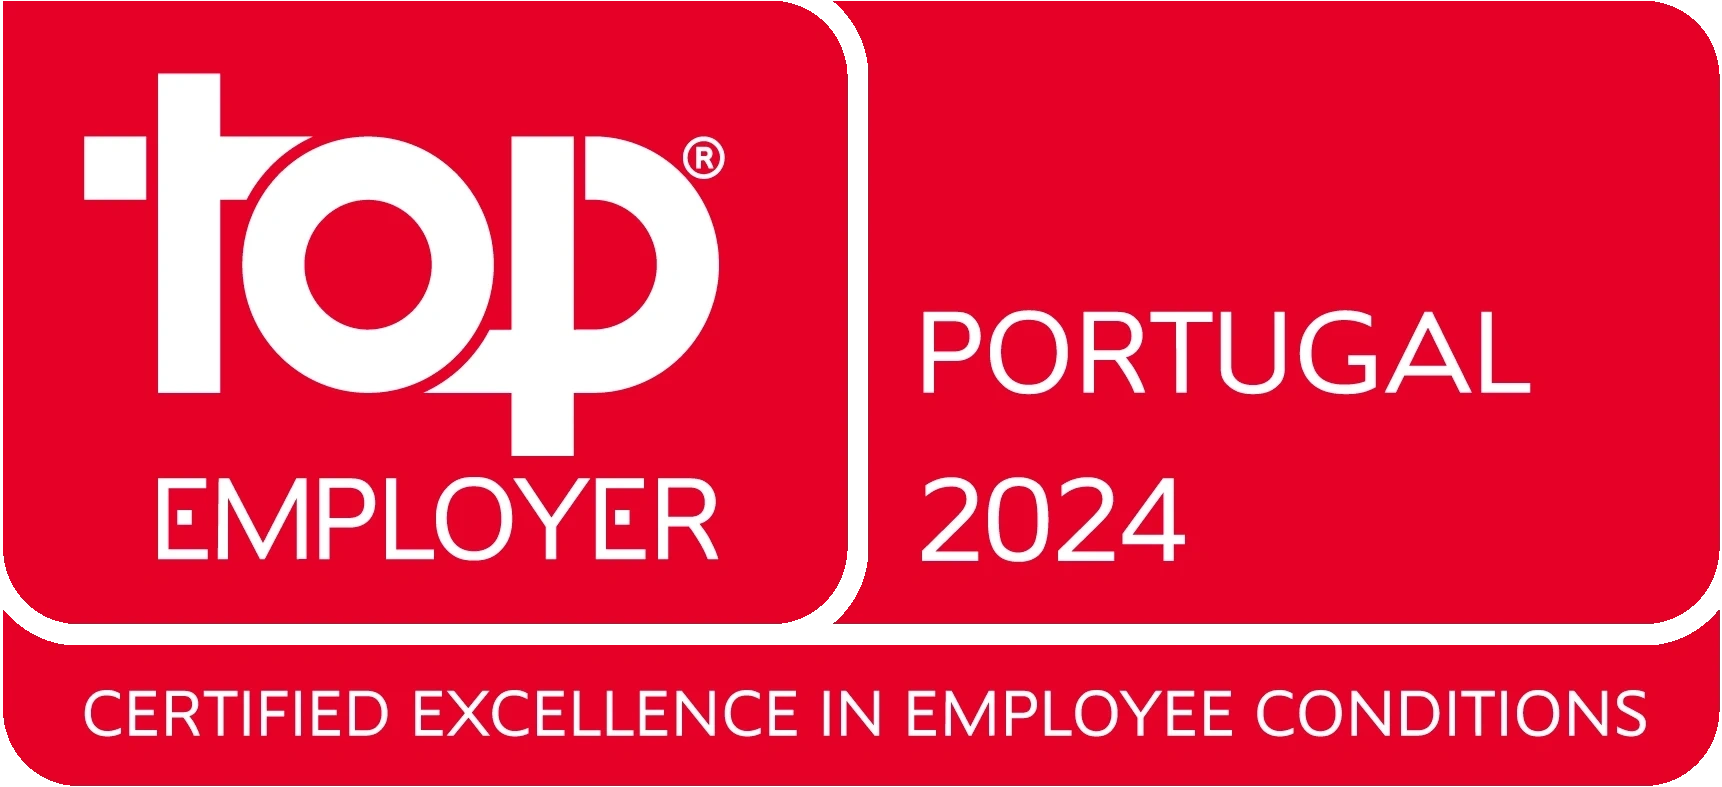 We are a Top Employer in Portugal